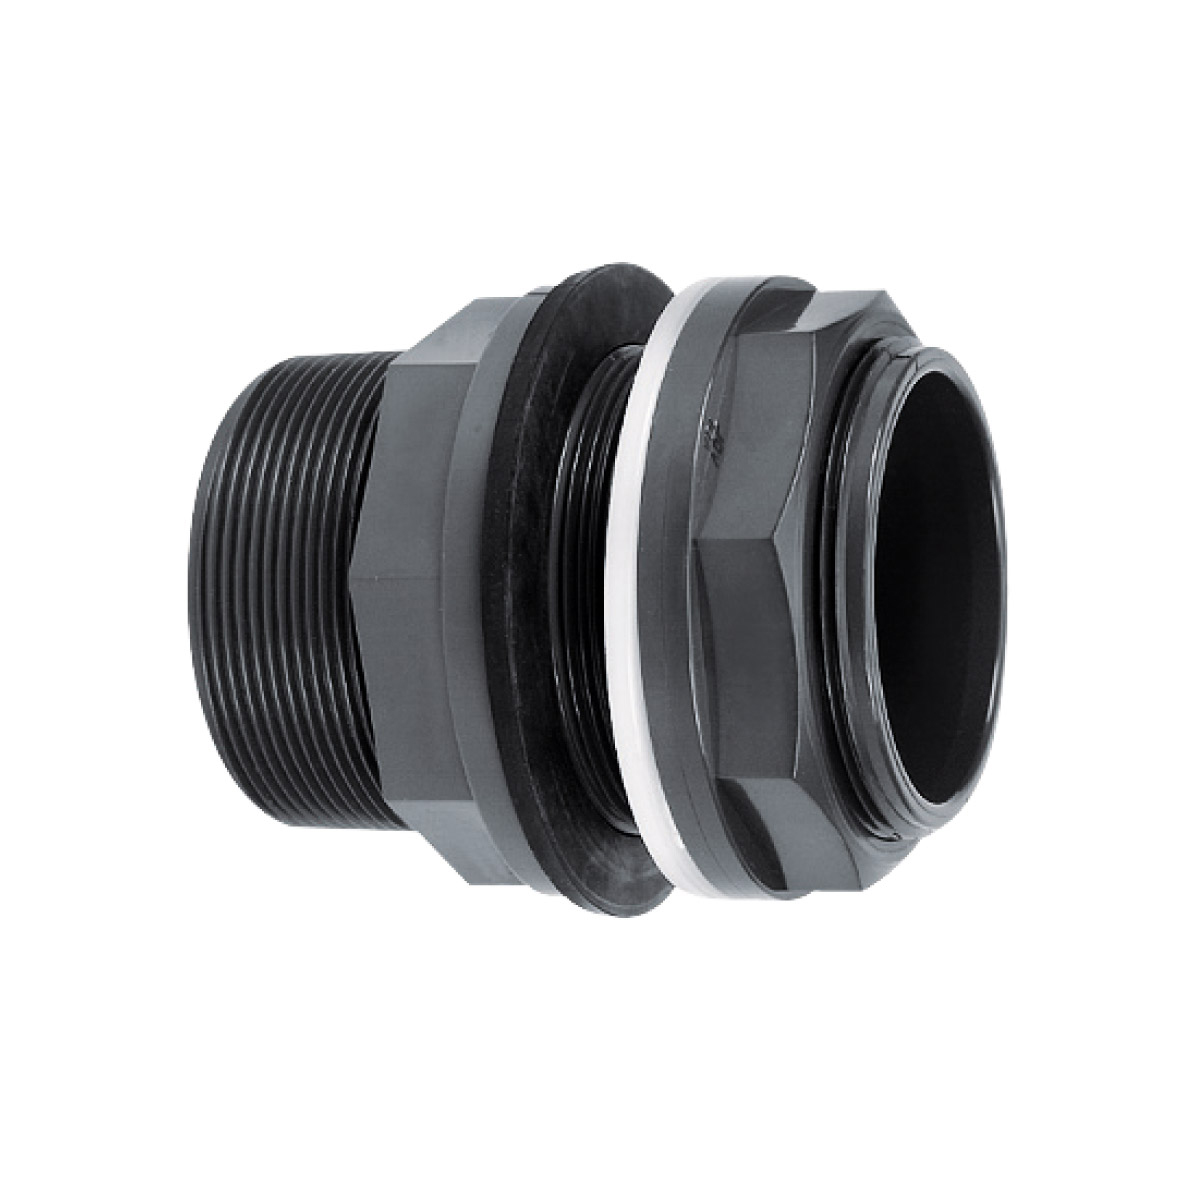 IBG® tank adapter solvent socket - BSP male/female thread, sealing rings EPDM and polyamide, grey d20 IBG® tank adapter solvent socket - BSP male/female thread, sealing rings EPDM and polyamide, grey d20